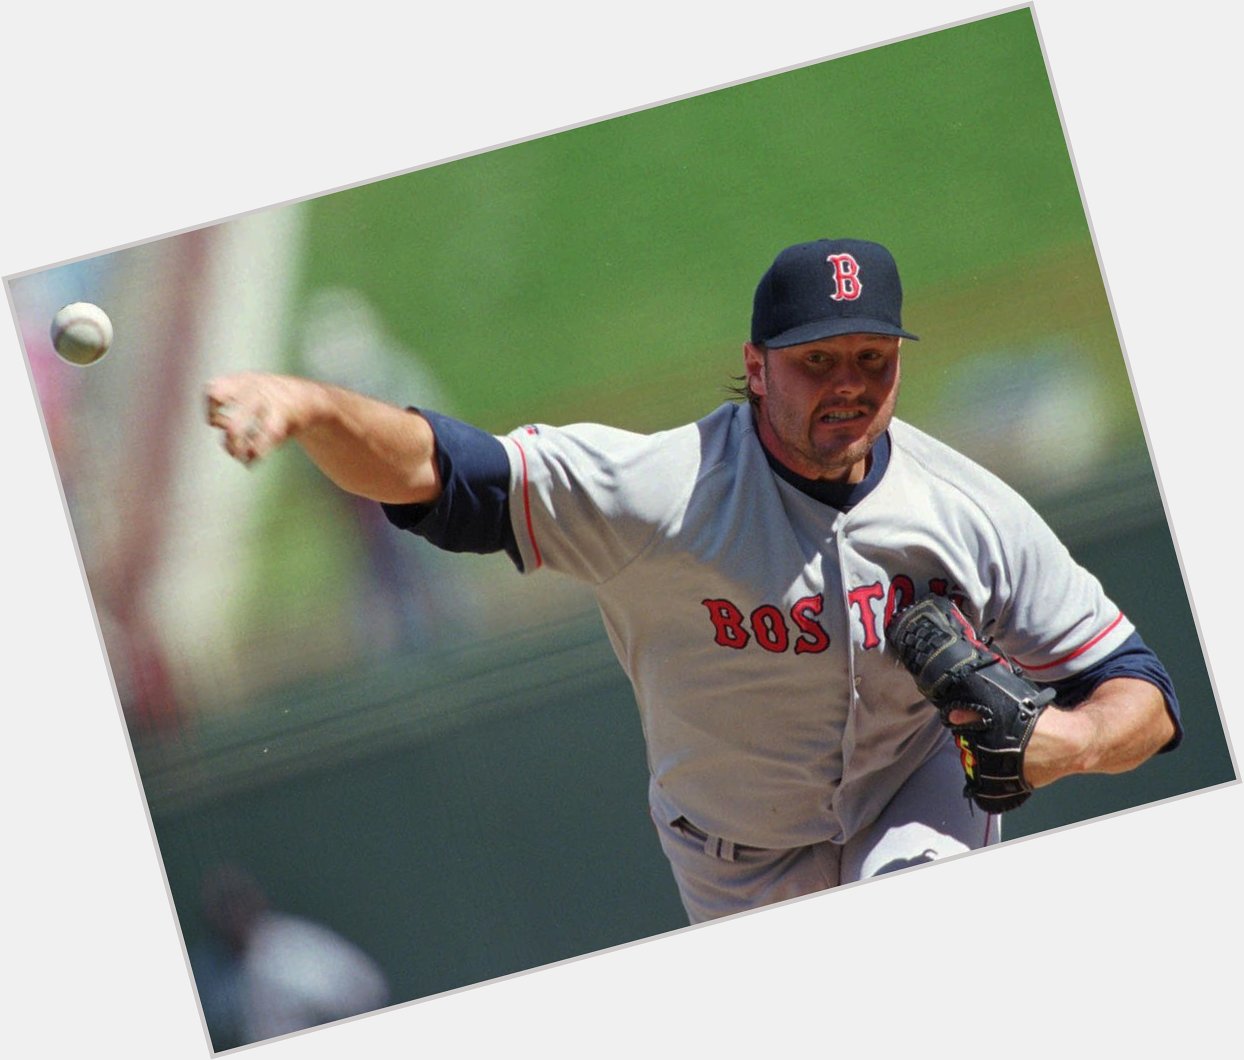 Happy Birthday to Roger Clemens who turns 55 today! 